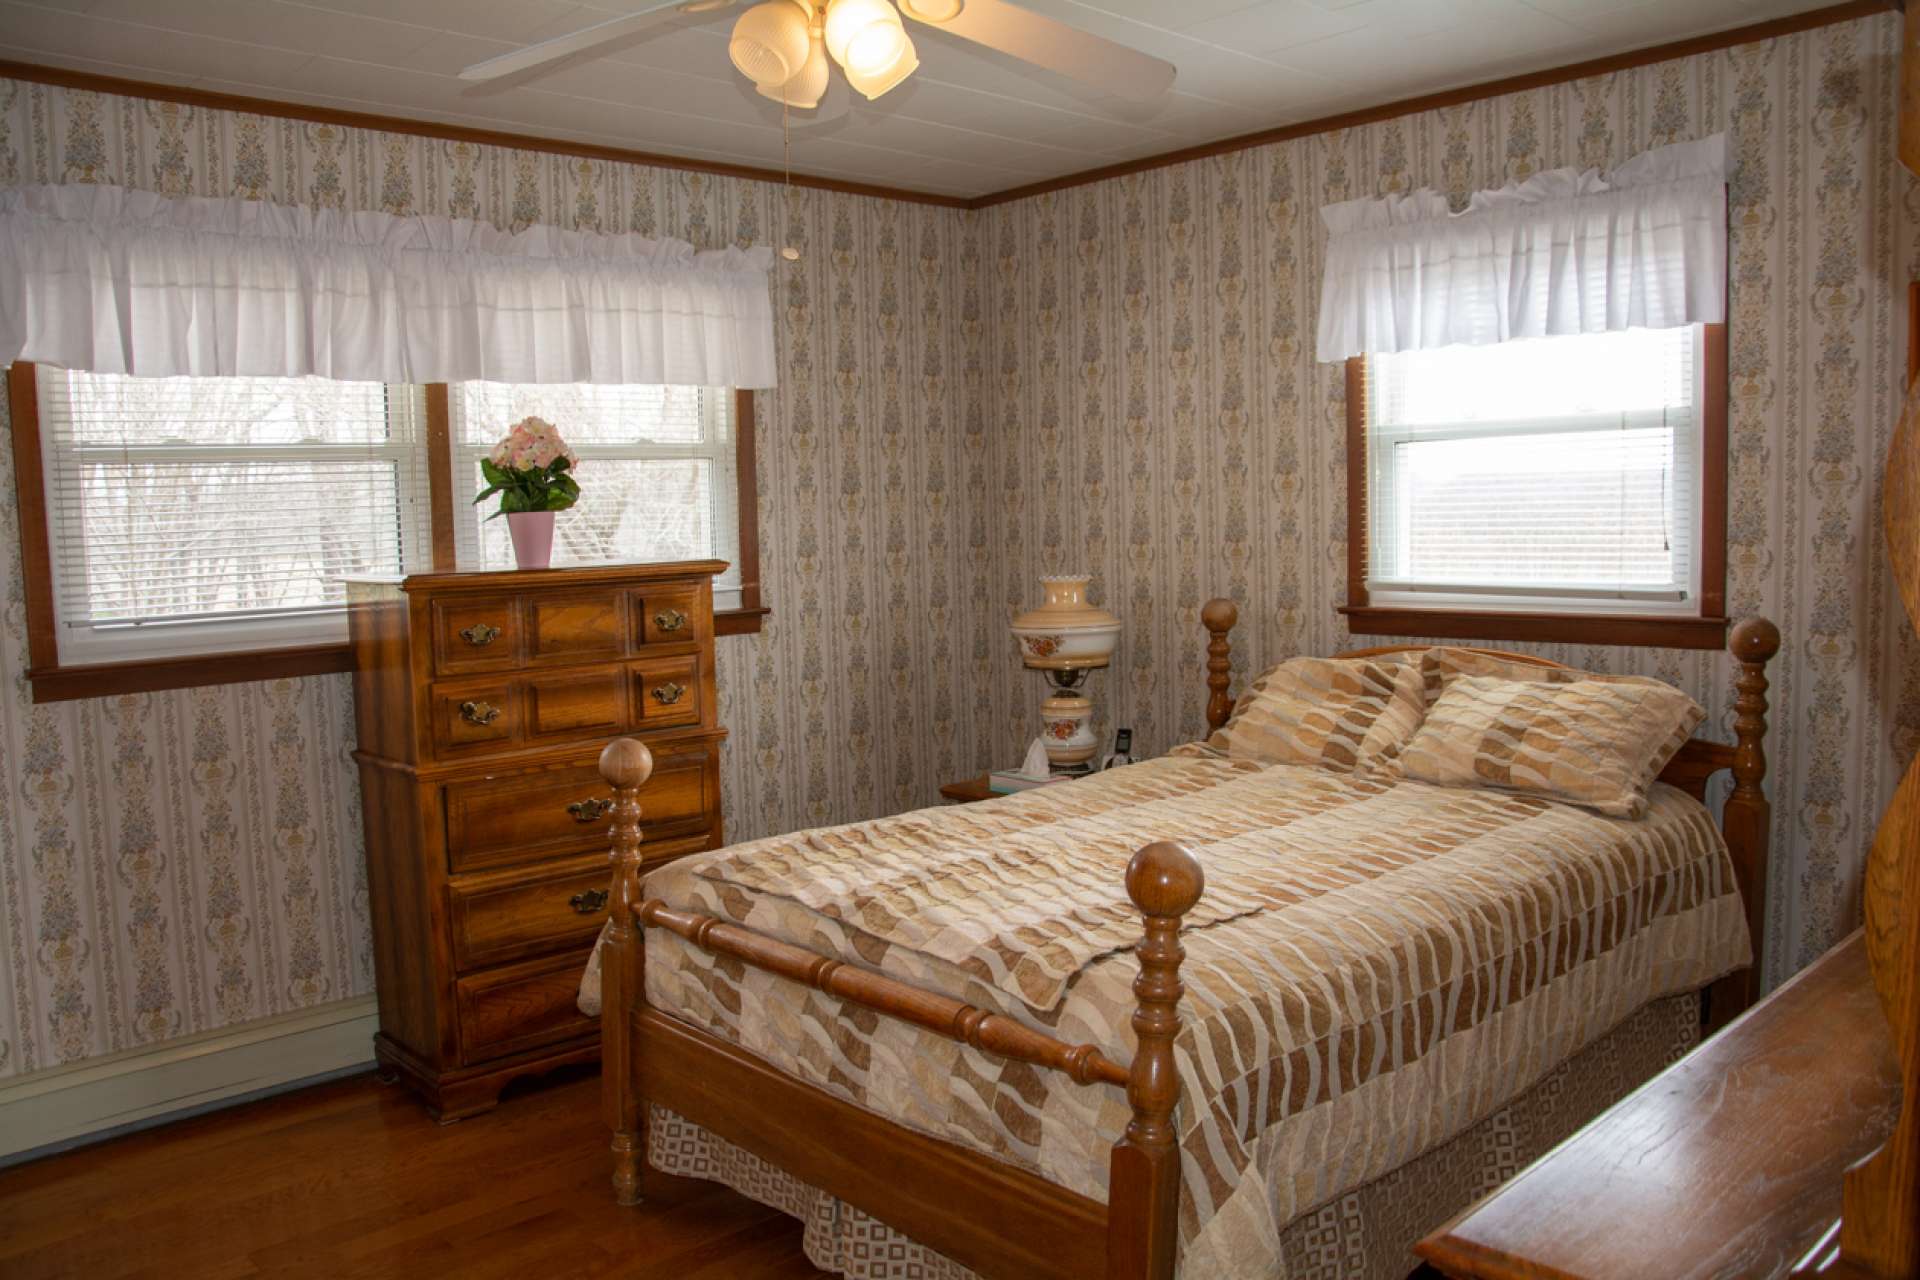 Master bedroom is located on the back of the house.